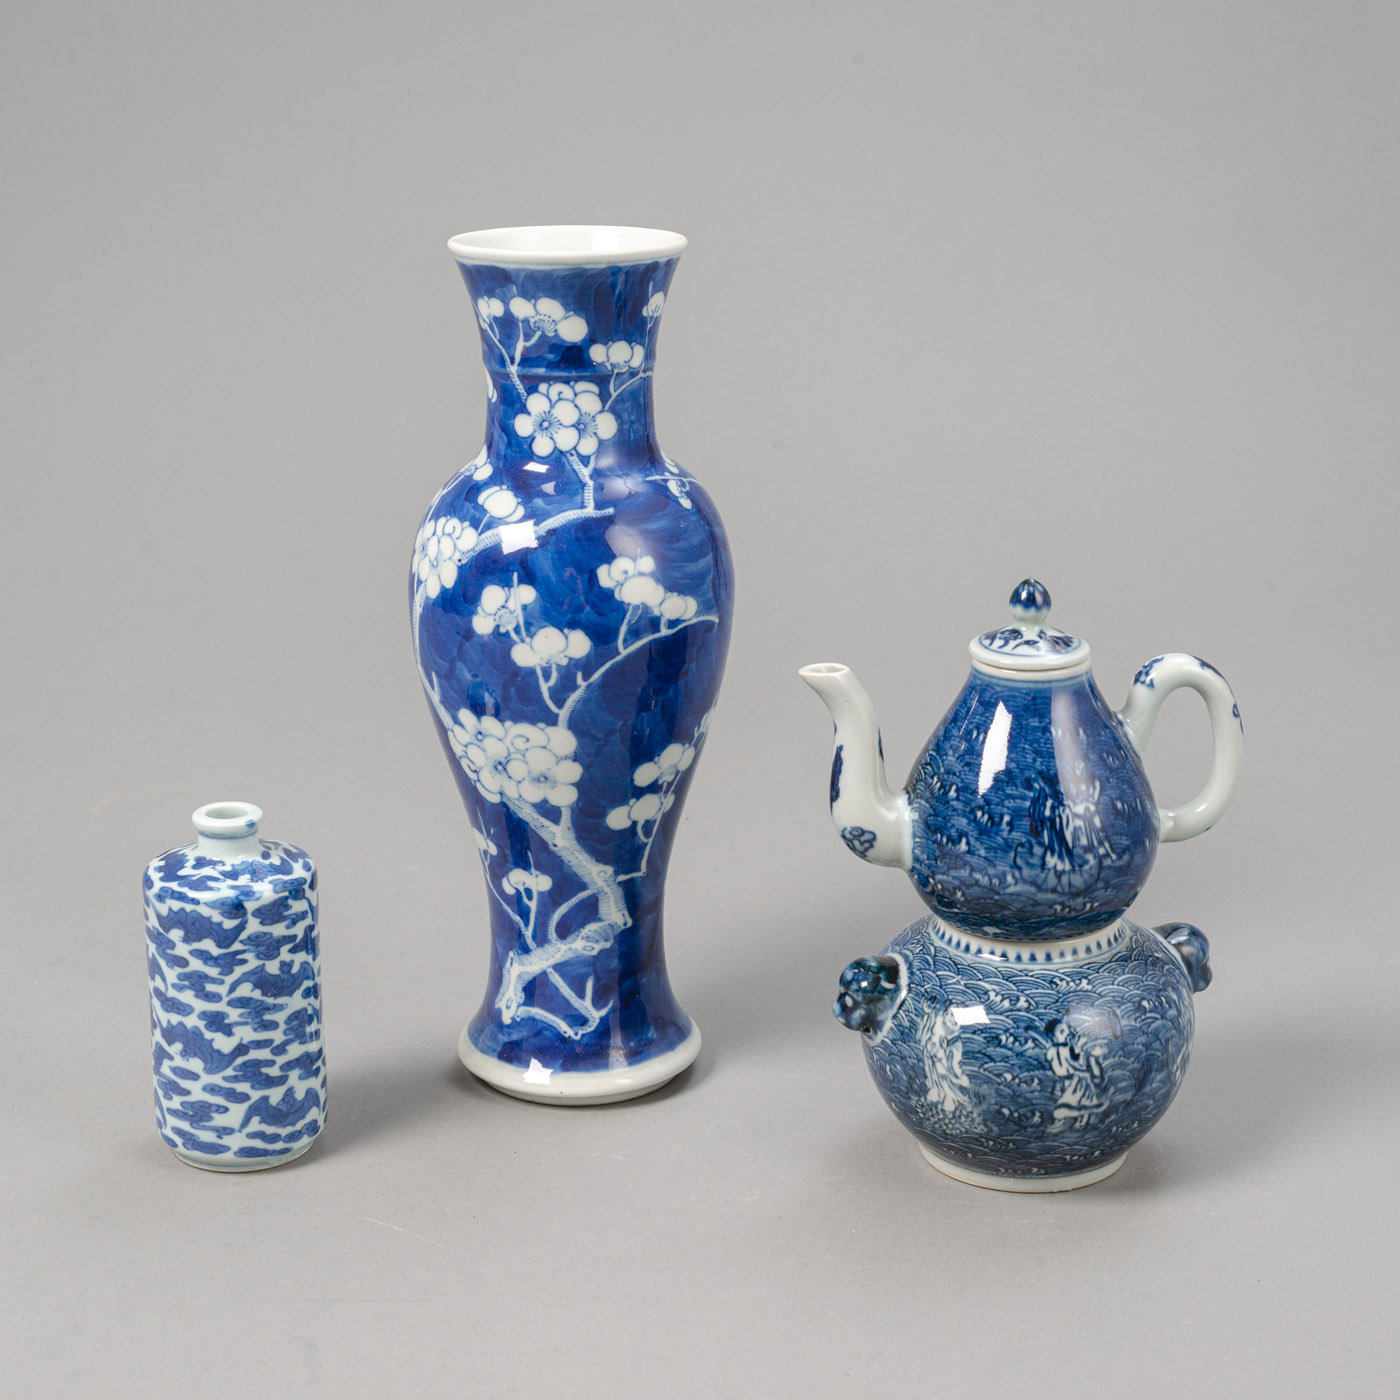 <b>A TWO-PART BLUE AND WHITE PORCELAIN EWER, A SNUFF BOTTLE, AND A VASE</b>